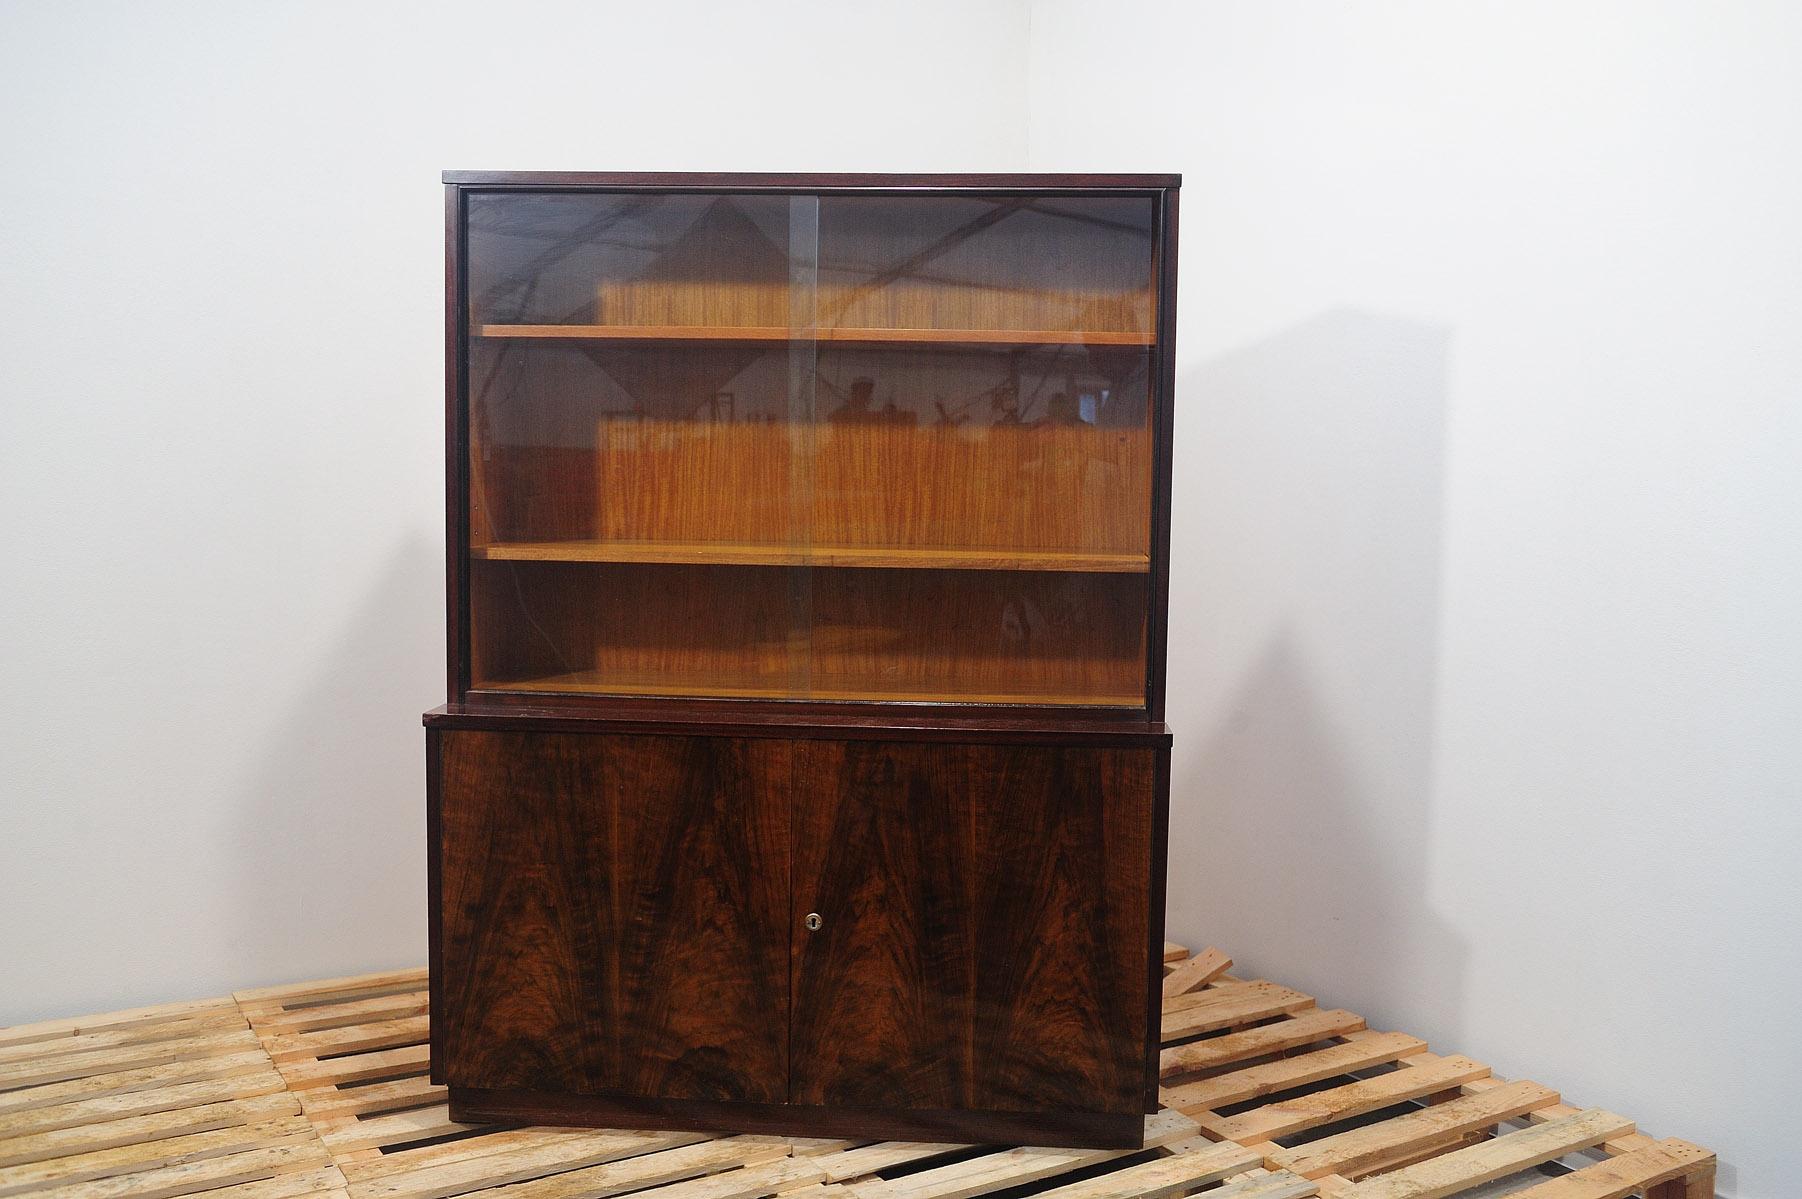 This bookcase was made by Setona company in the former Czechoslovakia in the 1950´s.

It features a regular shapes, a solid structure and a geometric base on which the library stands. It´s made of walnut wood.
In good Vintage condition, showing